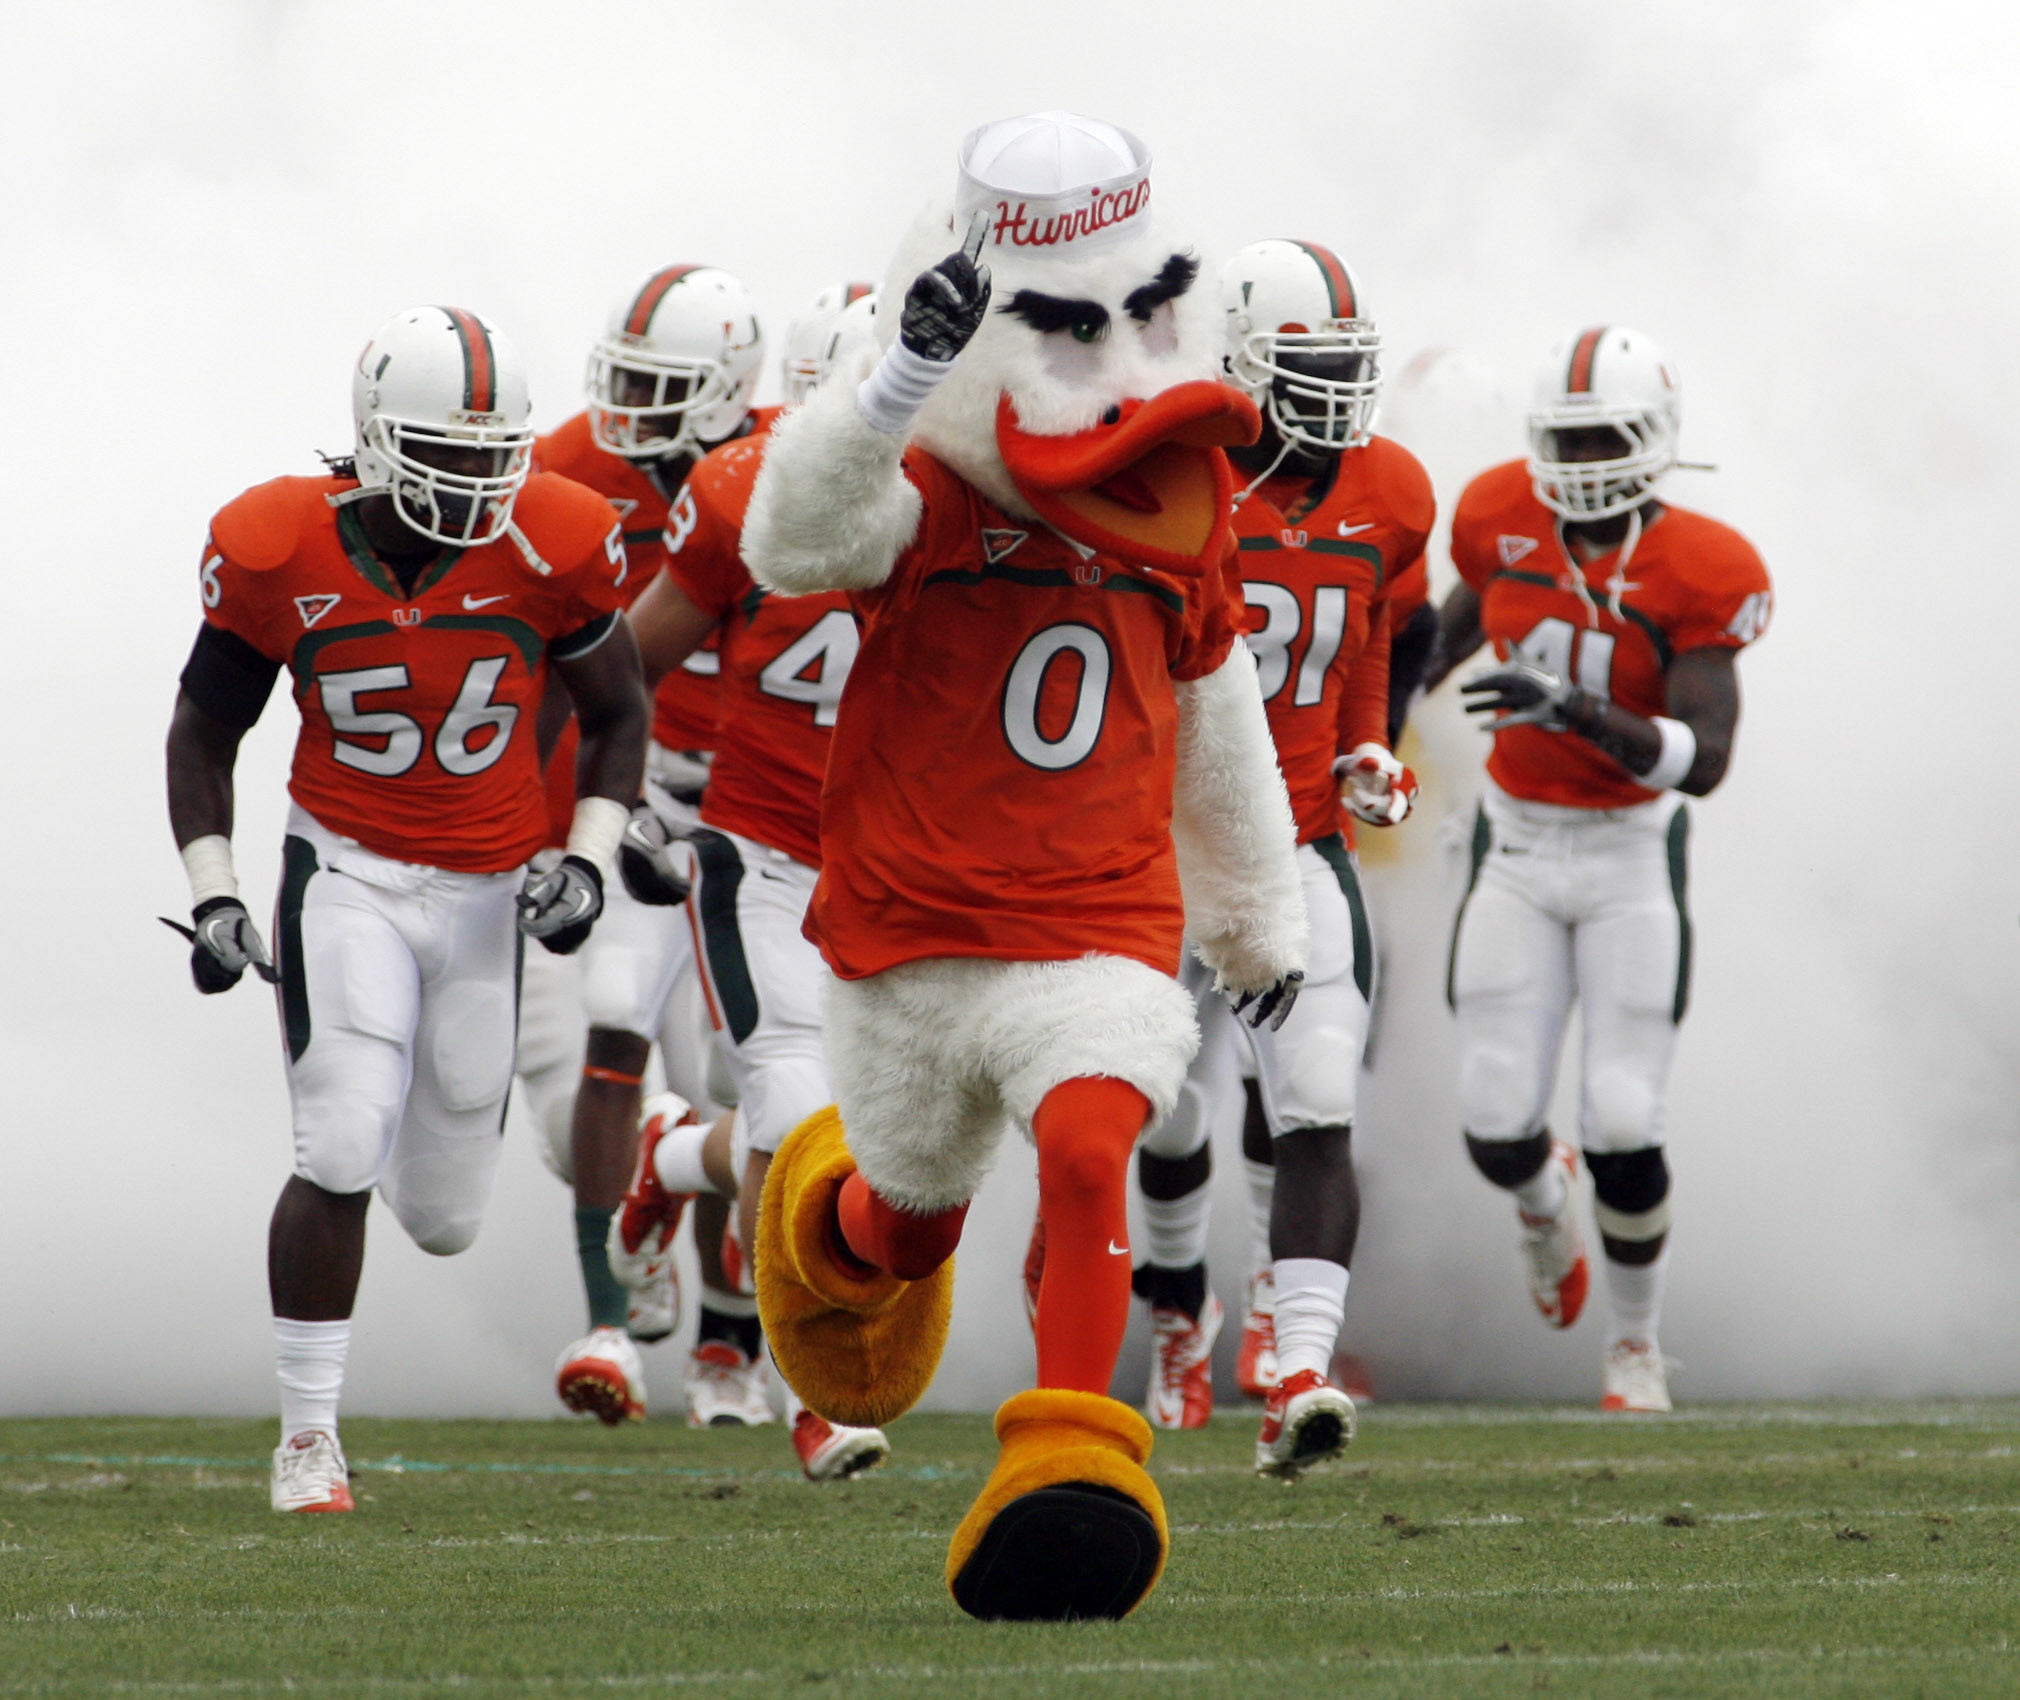 Miamis football team sat out the past two postseasons as self imposed punishment for NCAA